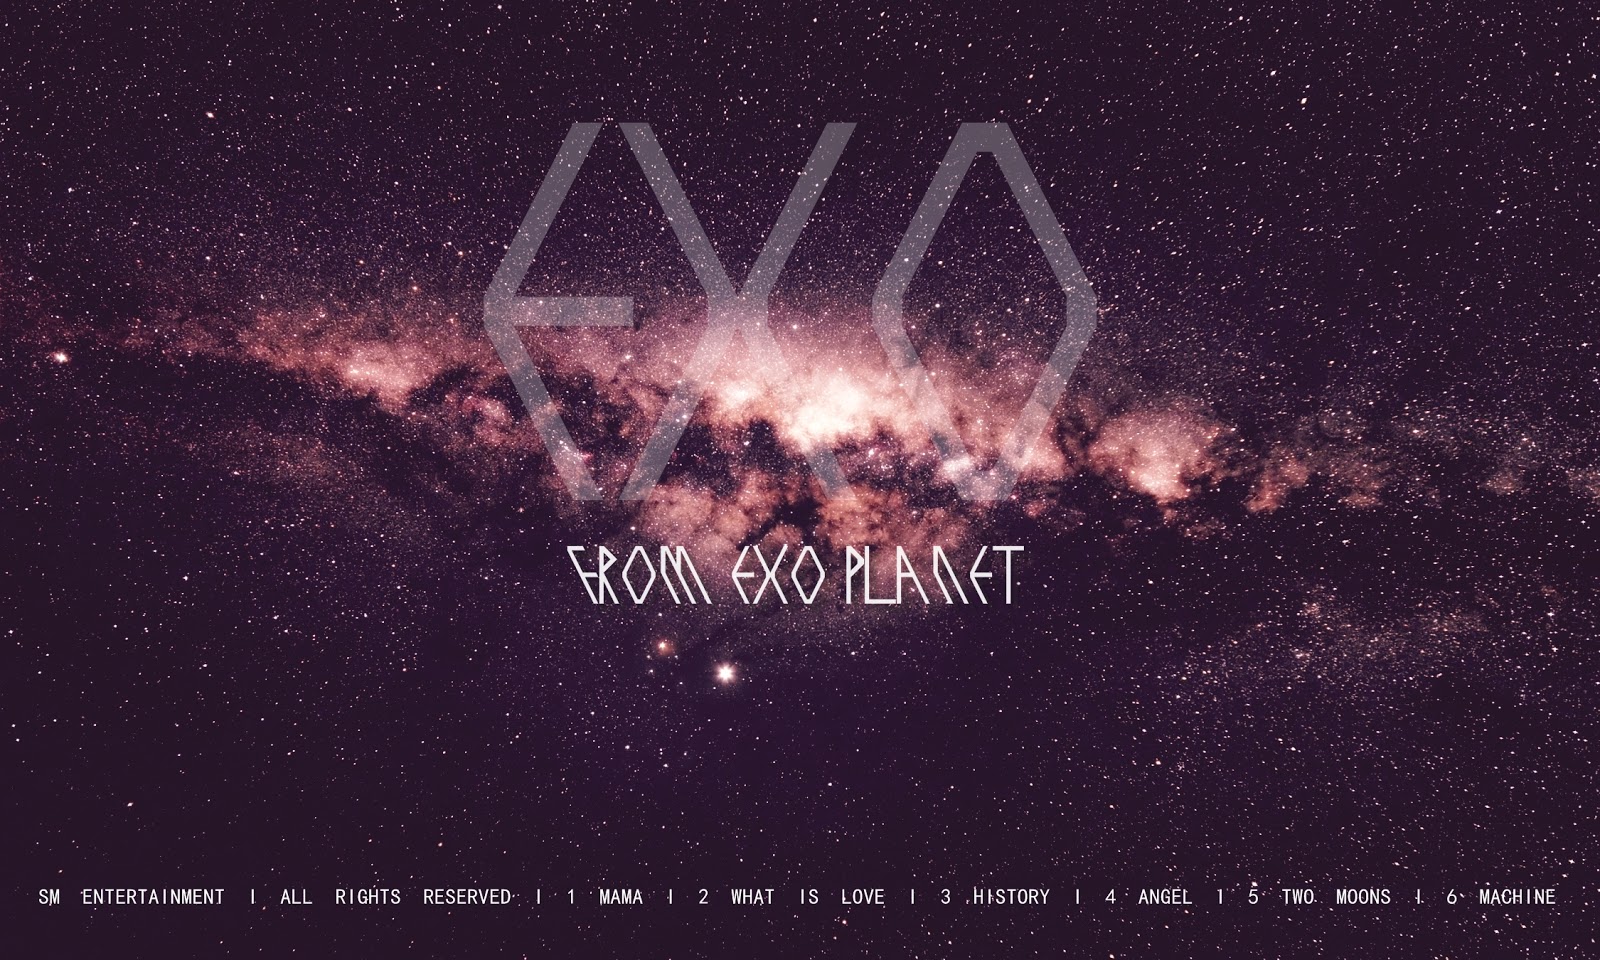 EXO from EXO planet by SM entertainment